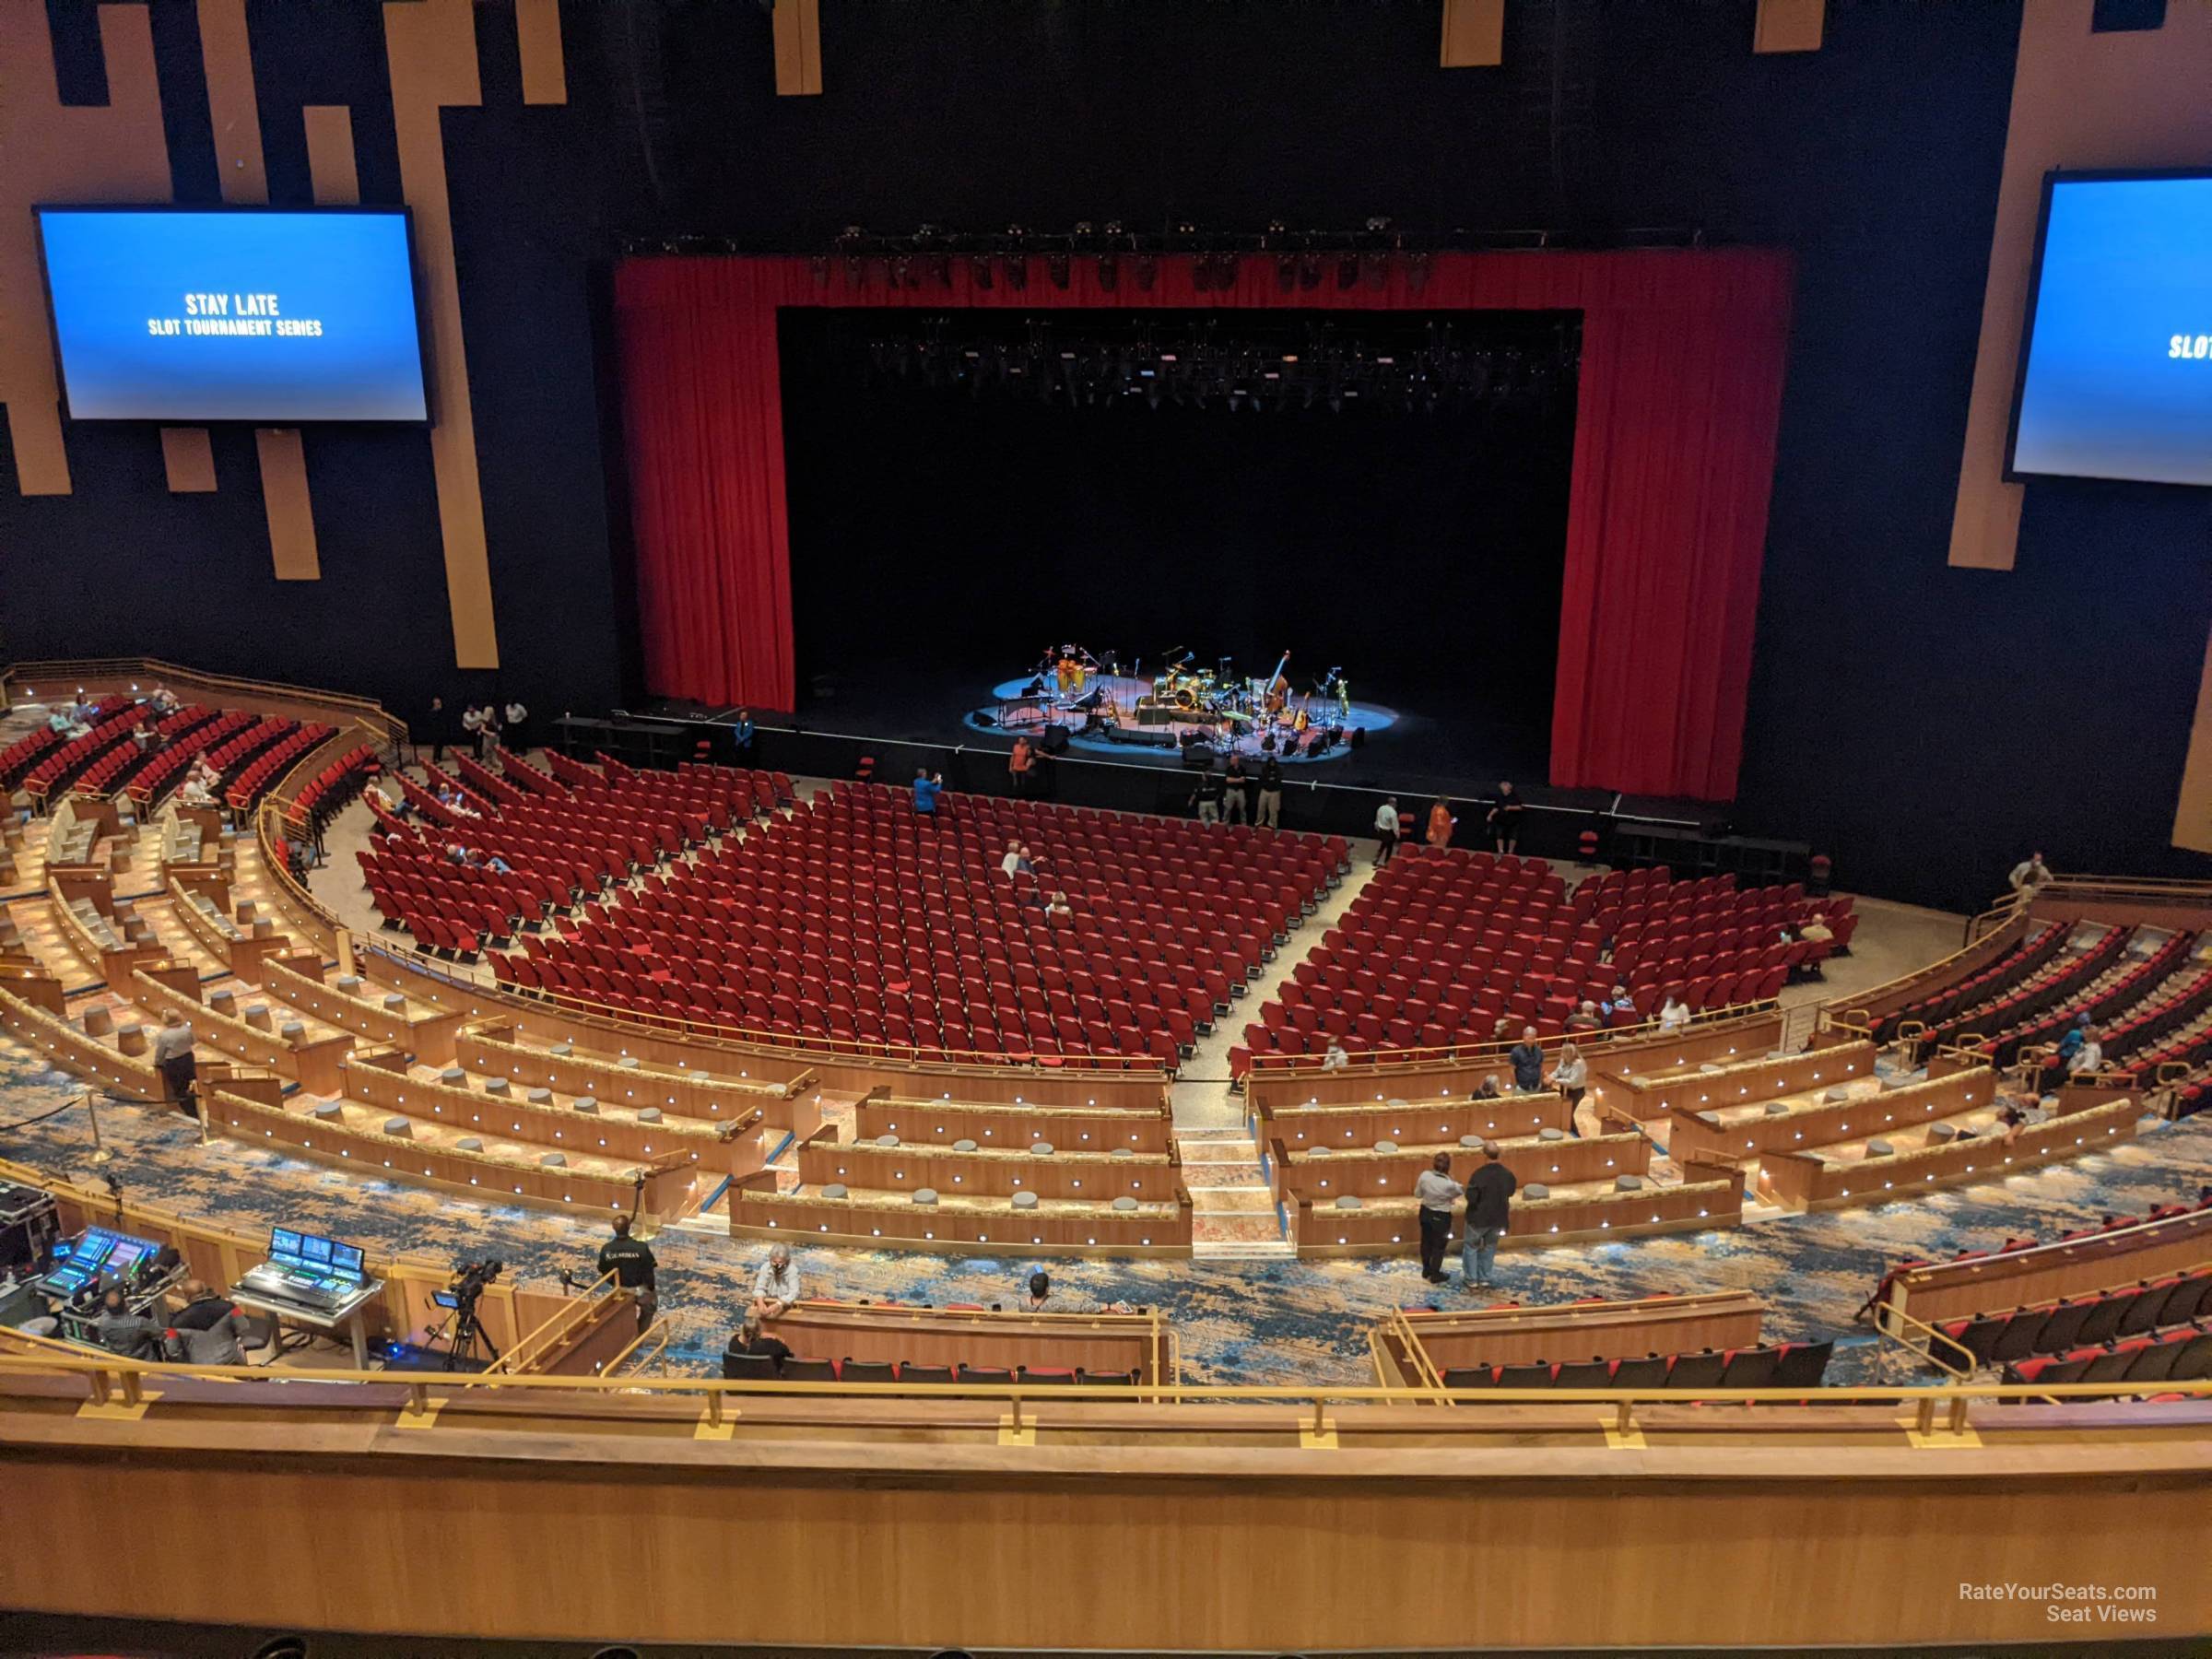 section 203, row d seat view  - hard rock live hollywood